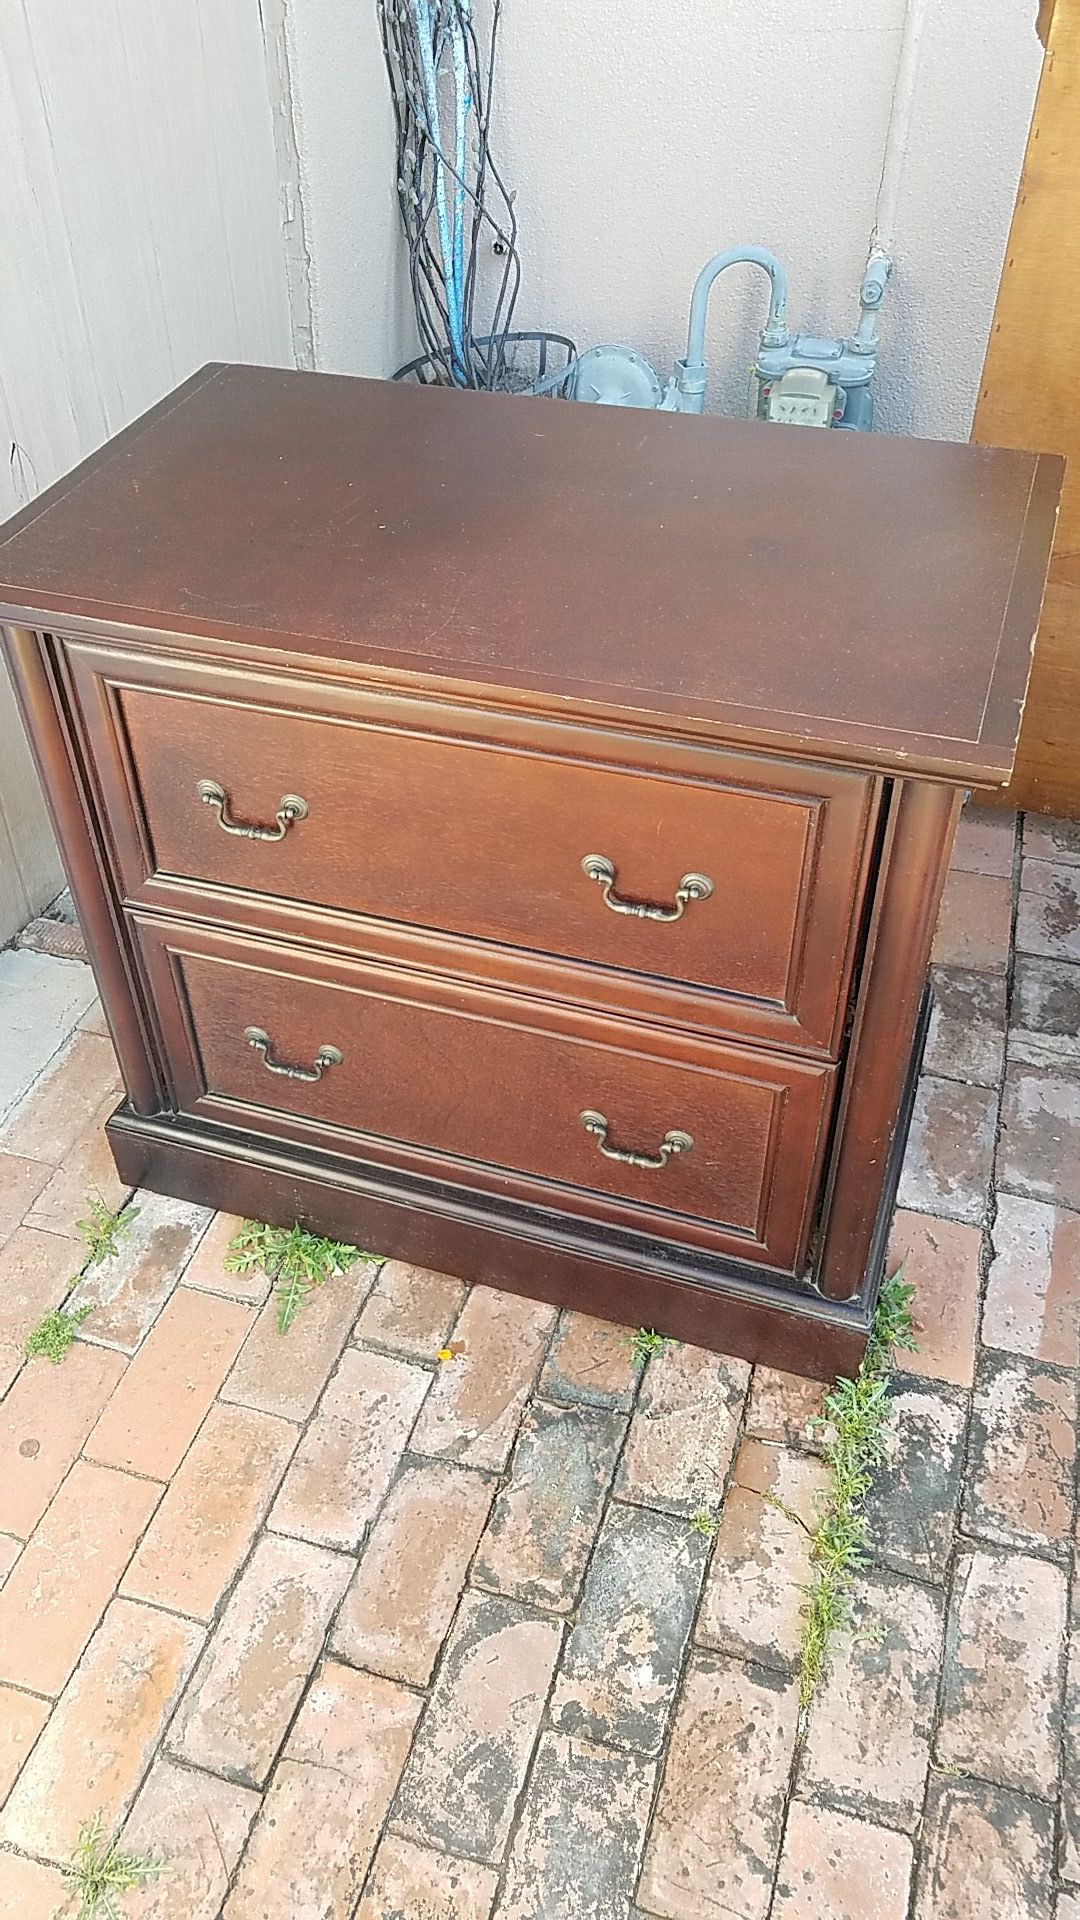 File cabinet or small chest heavy duty